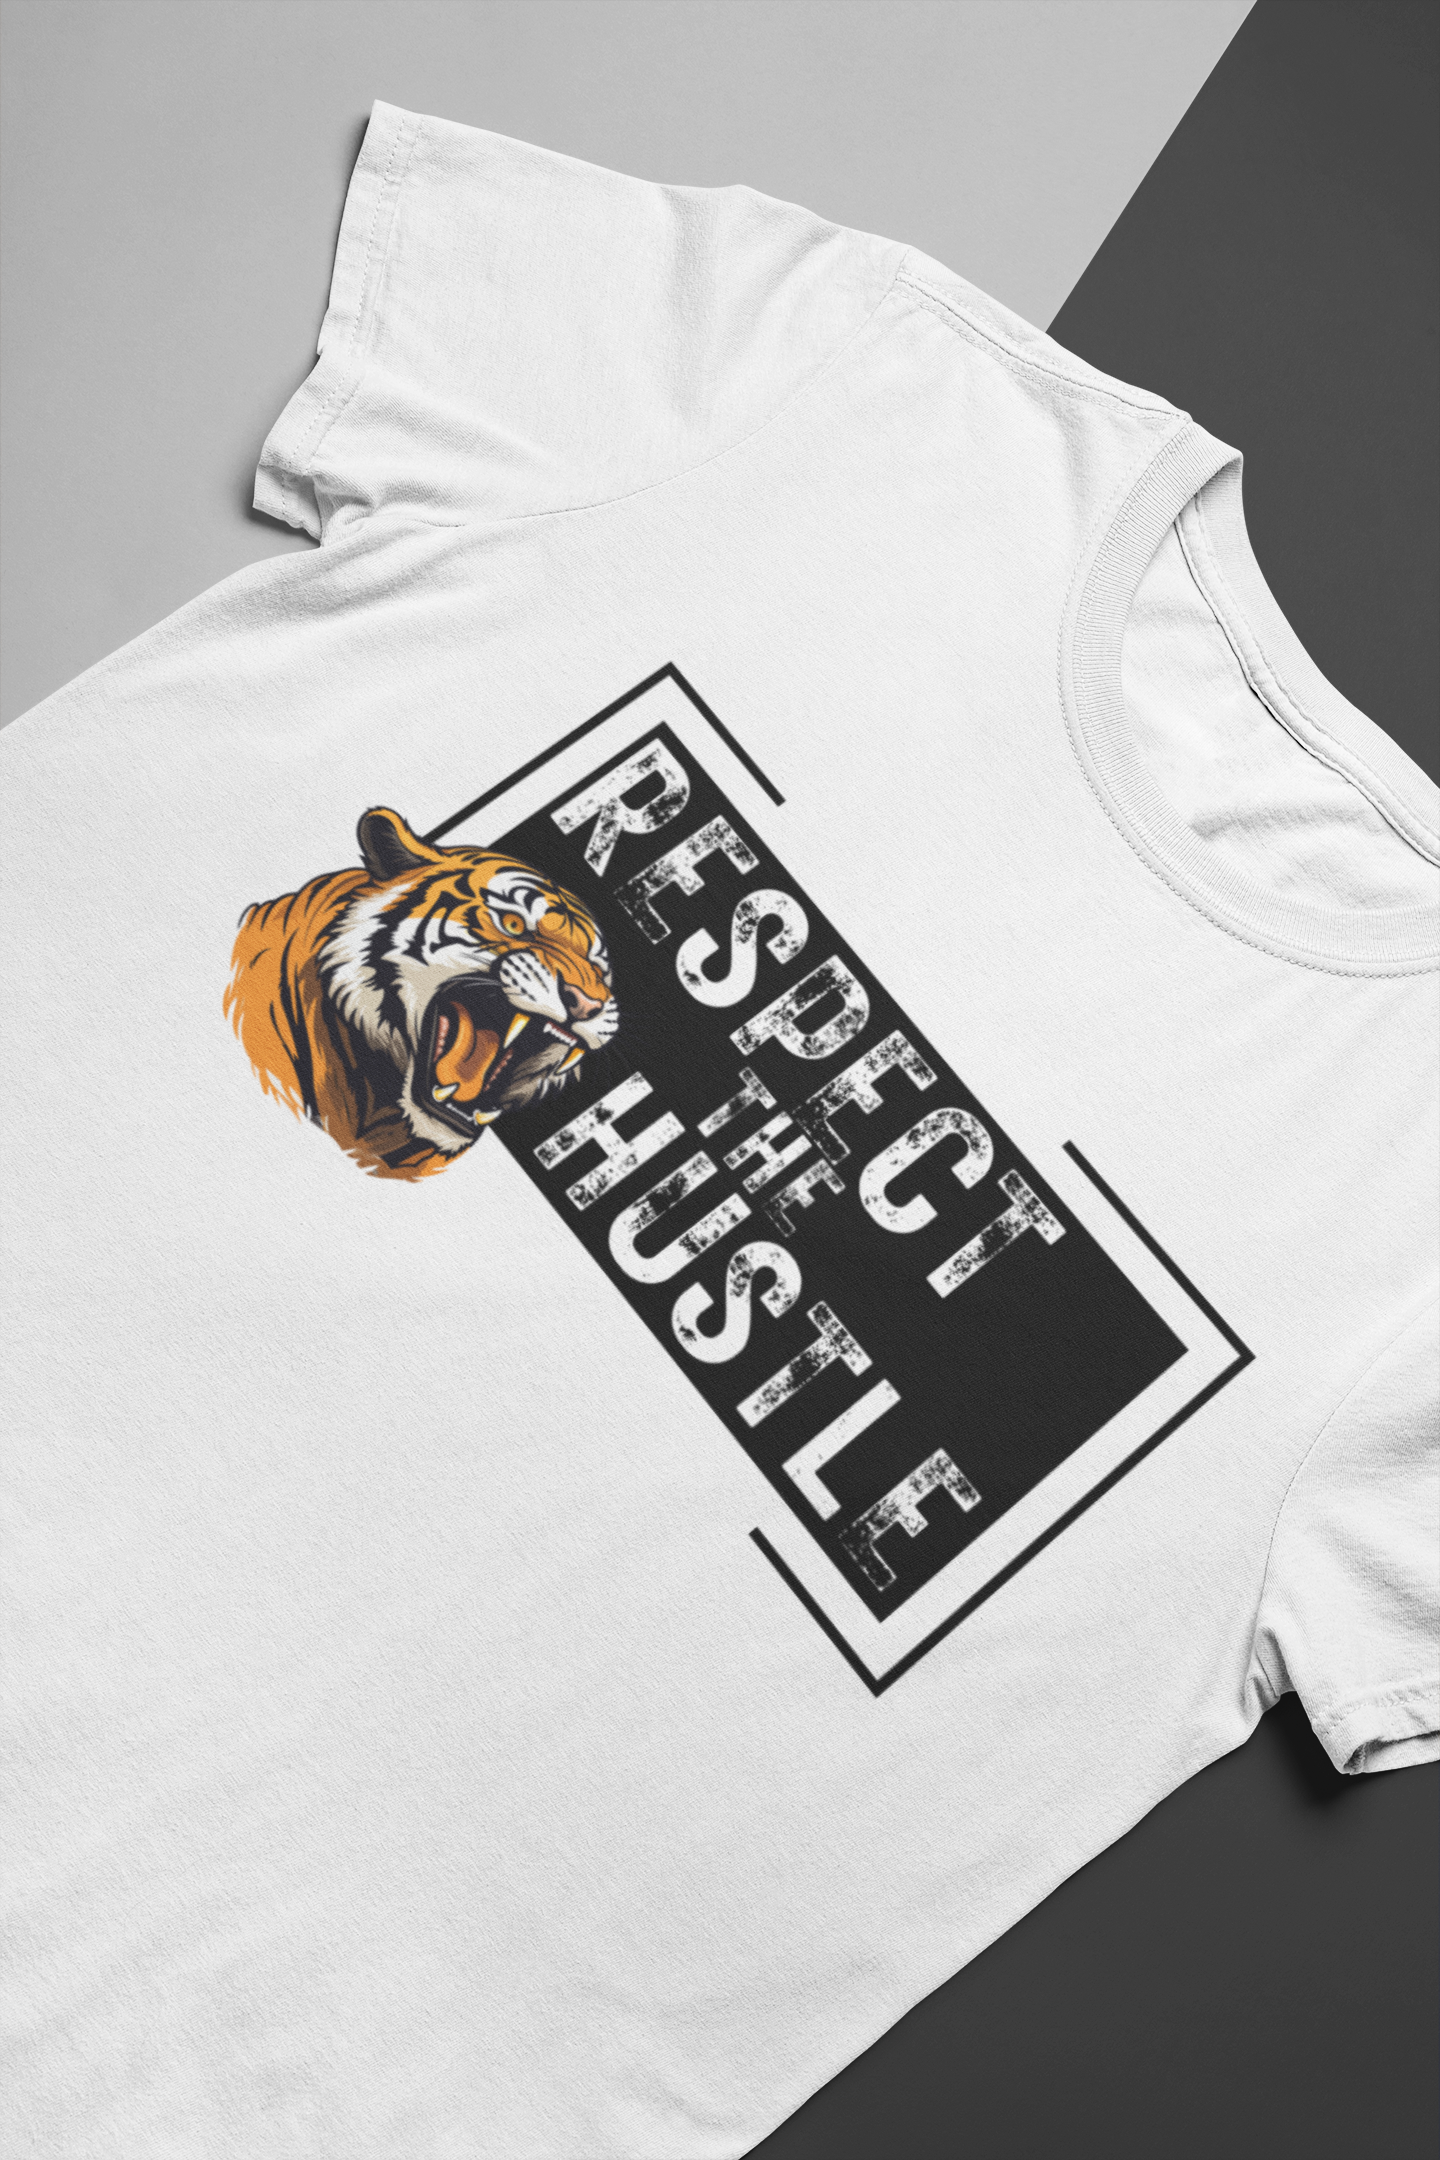 Respect The Hustle Tigers Tee